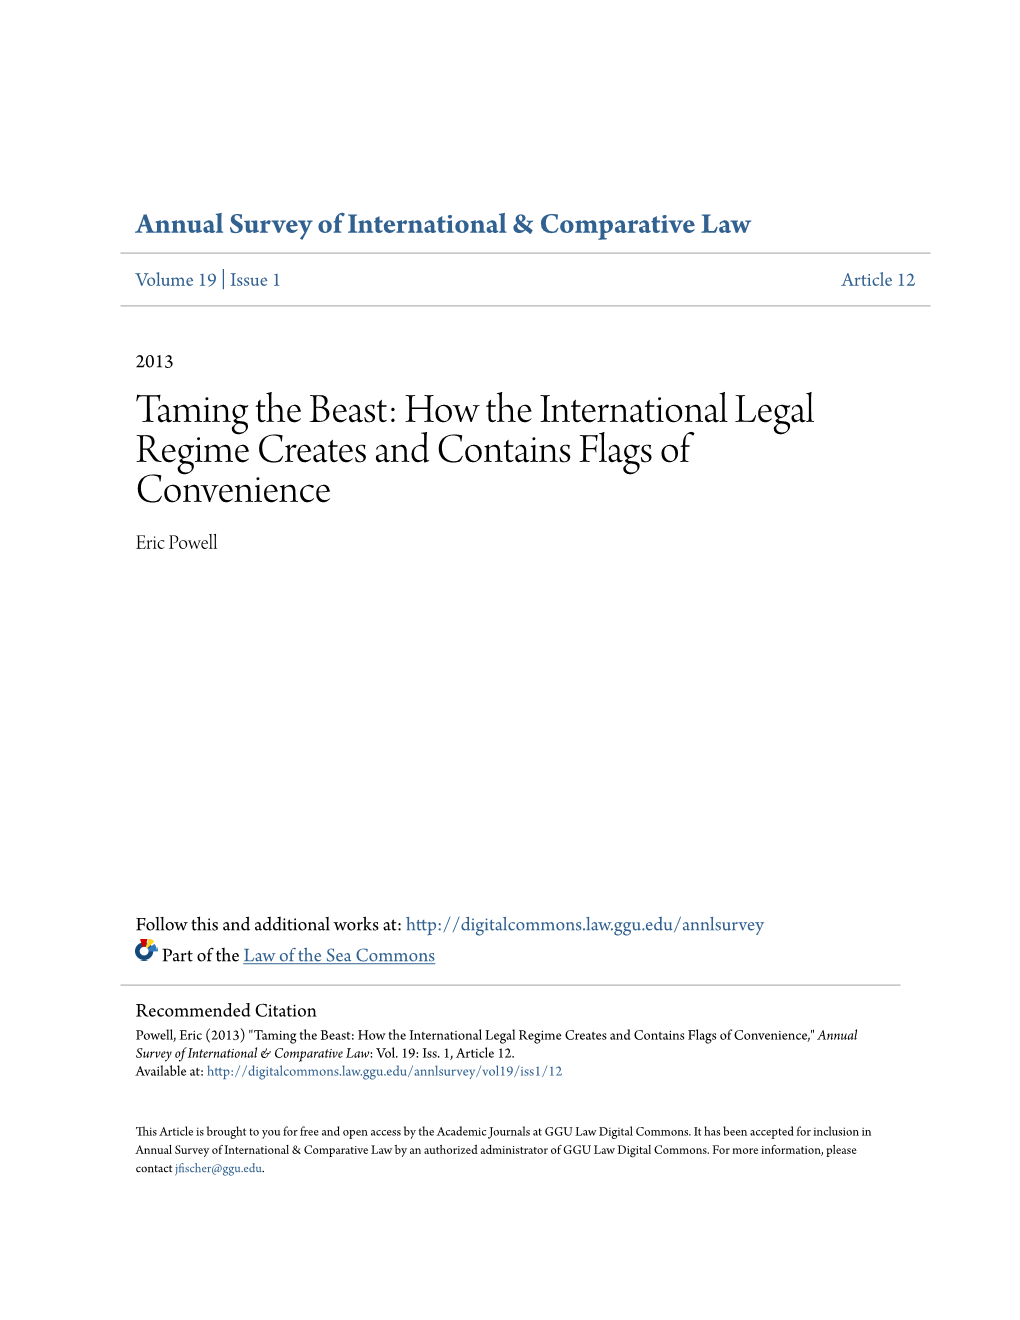 How the International Legal Regime Creates and Contains Flags of Convenience Eric Powell